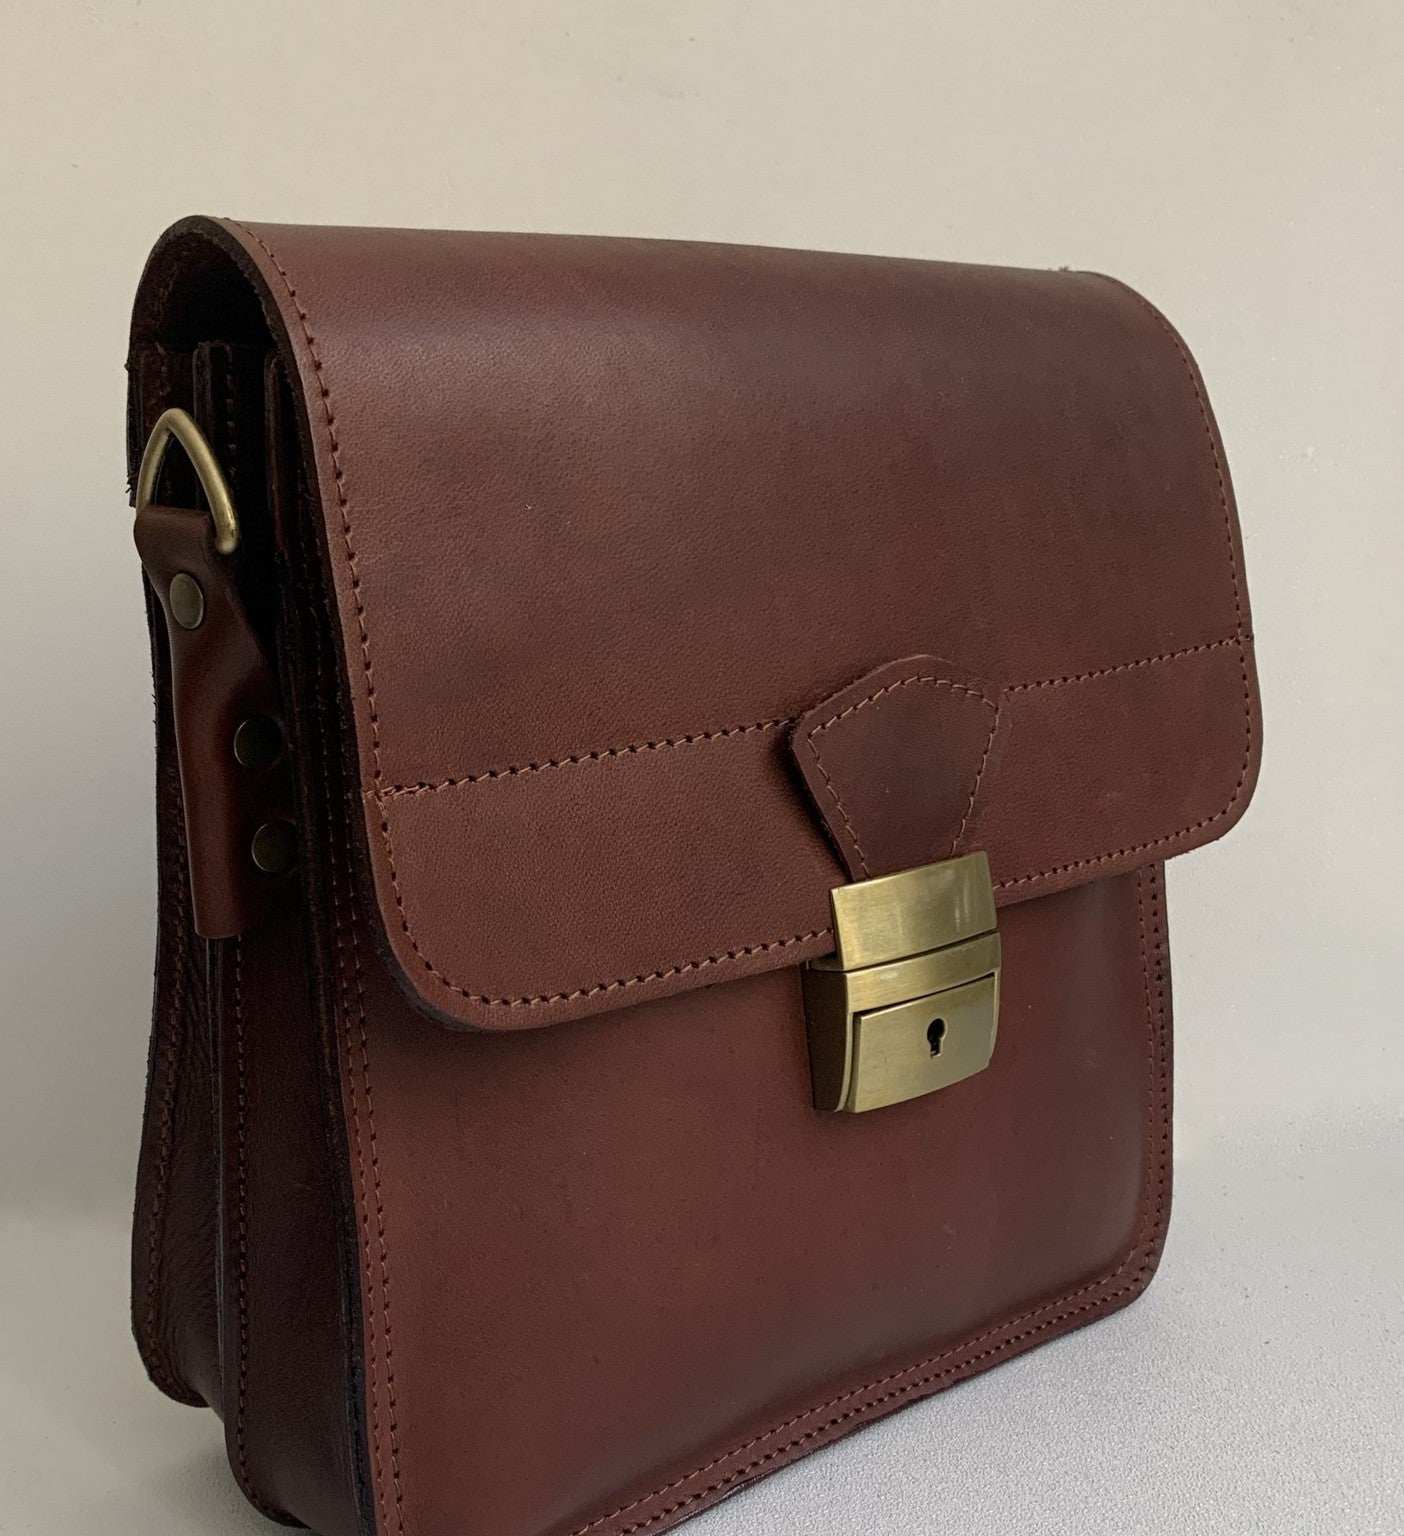 "Ikaros" - midsize crossbody bag handcrafted from natural light brown leather with square lock WT/52T